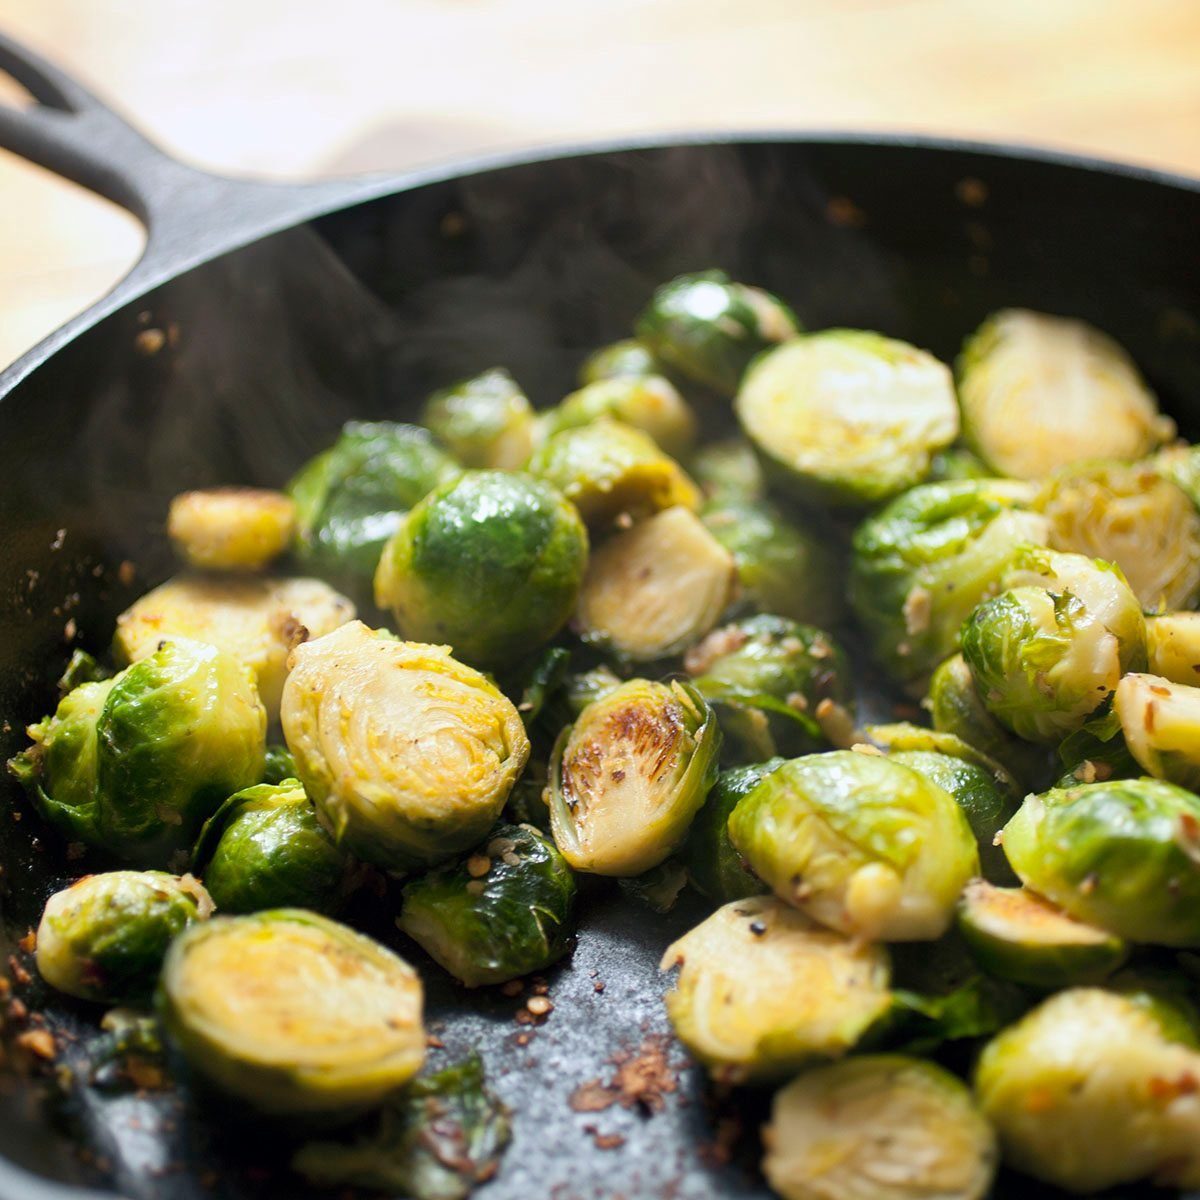 brussels sprouts hot off the stove with steam rising from the pan